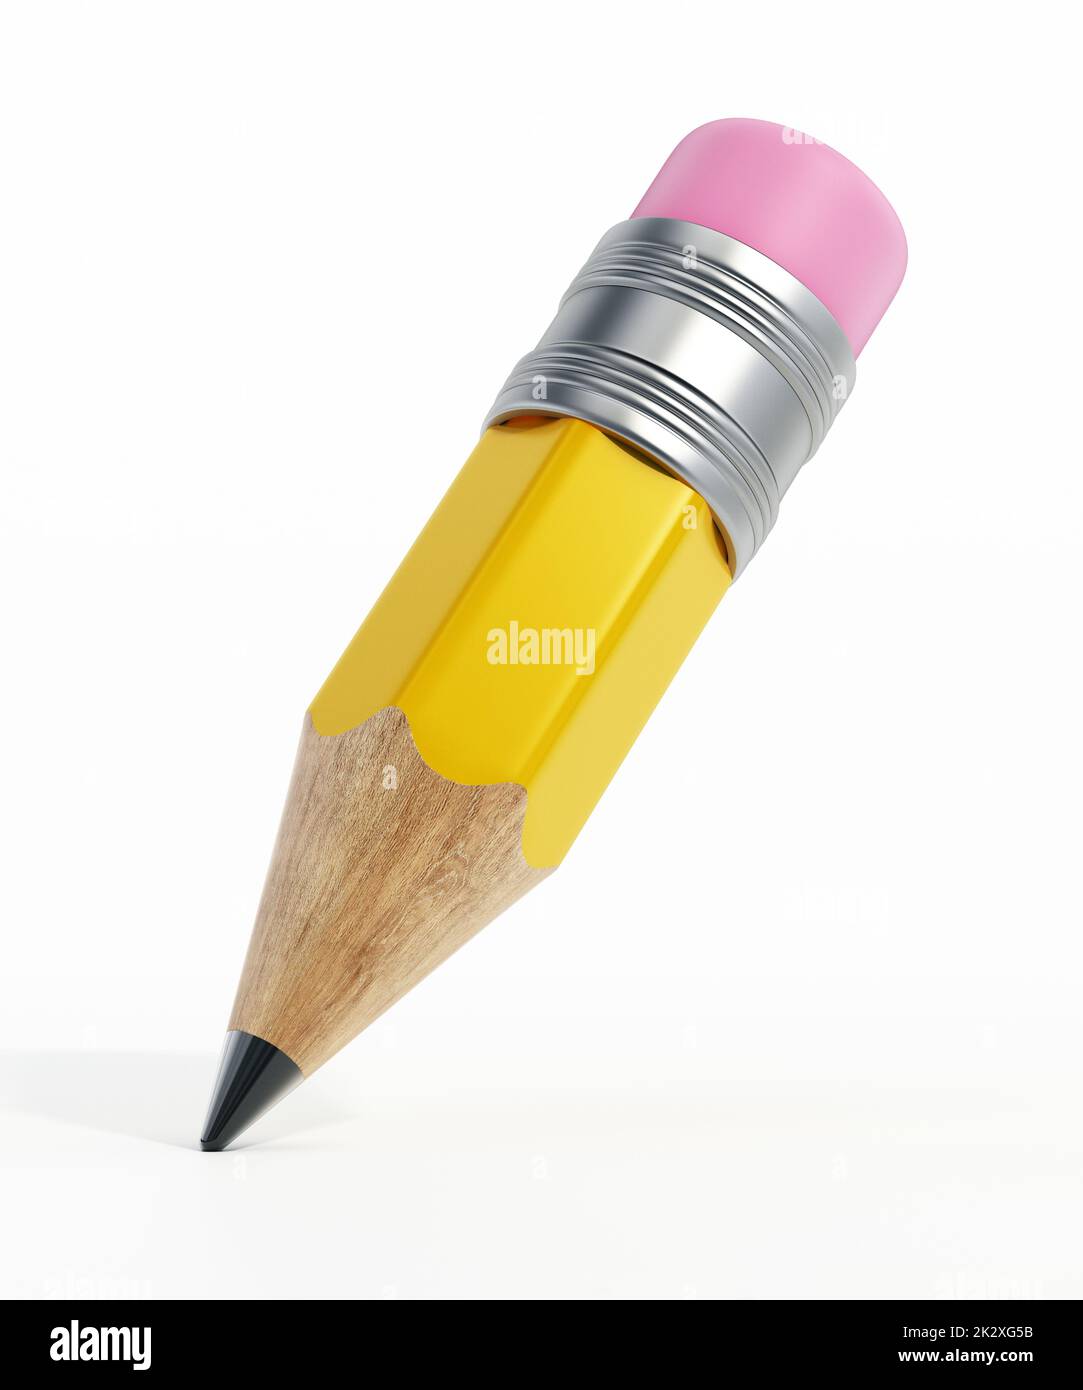 Short wooden pencil with eraser isolated on white background. 3D illustration Stock Photo